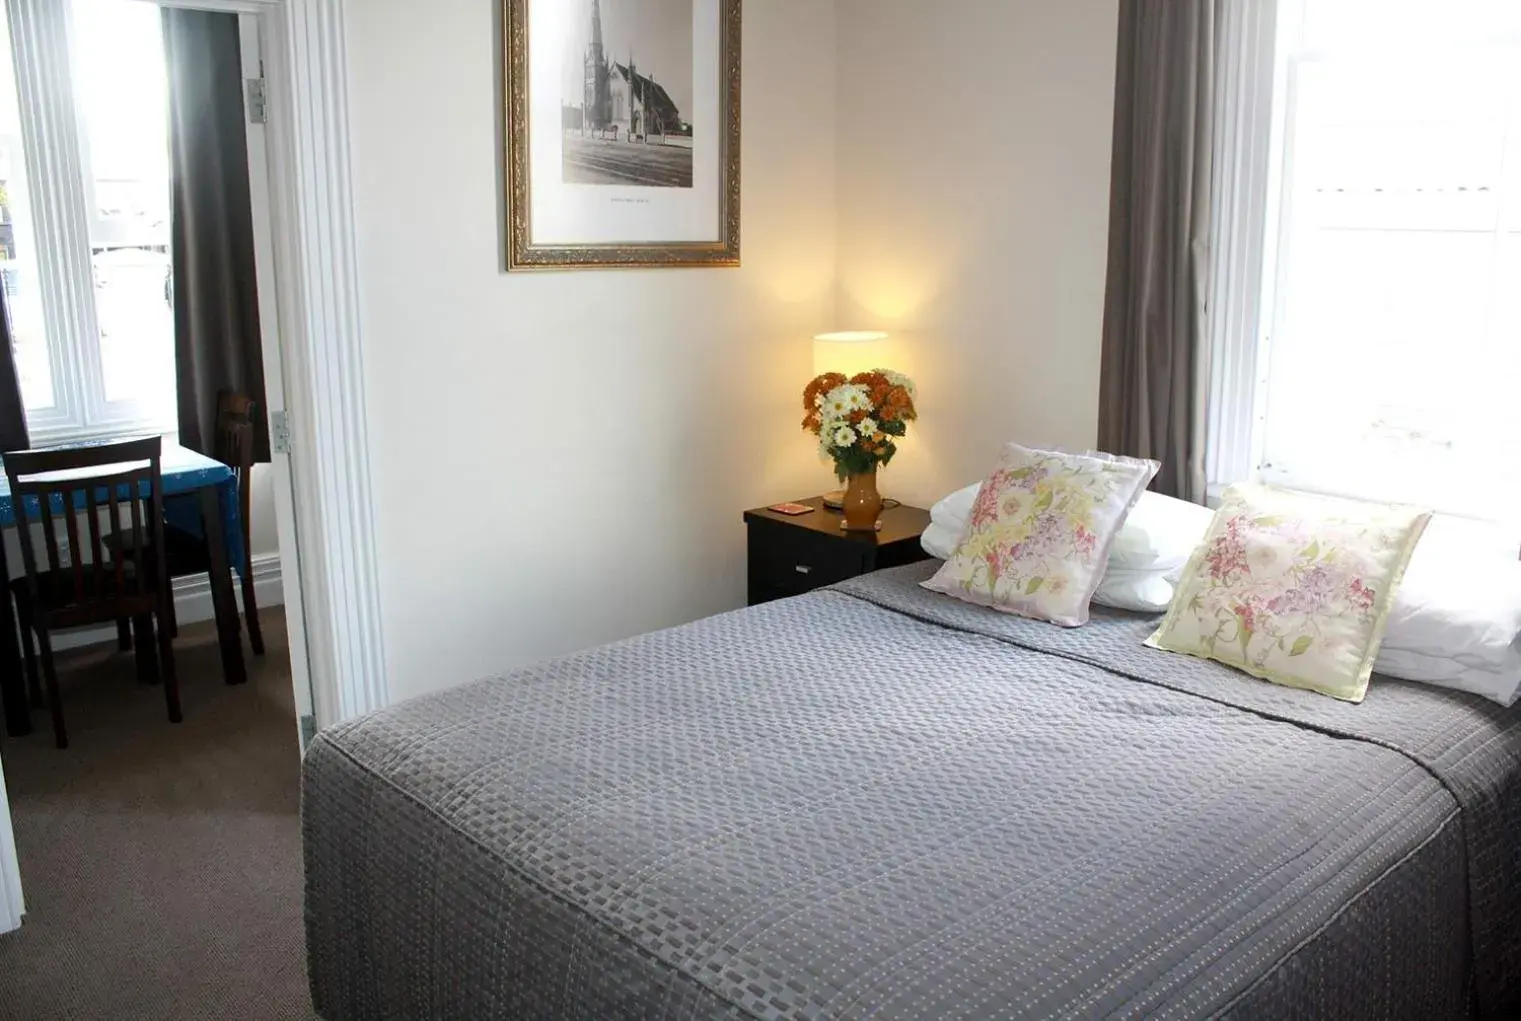 Bed, Room Photo in Ponsonby Manor